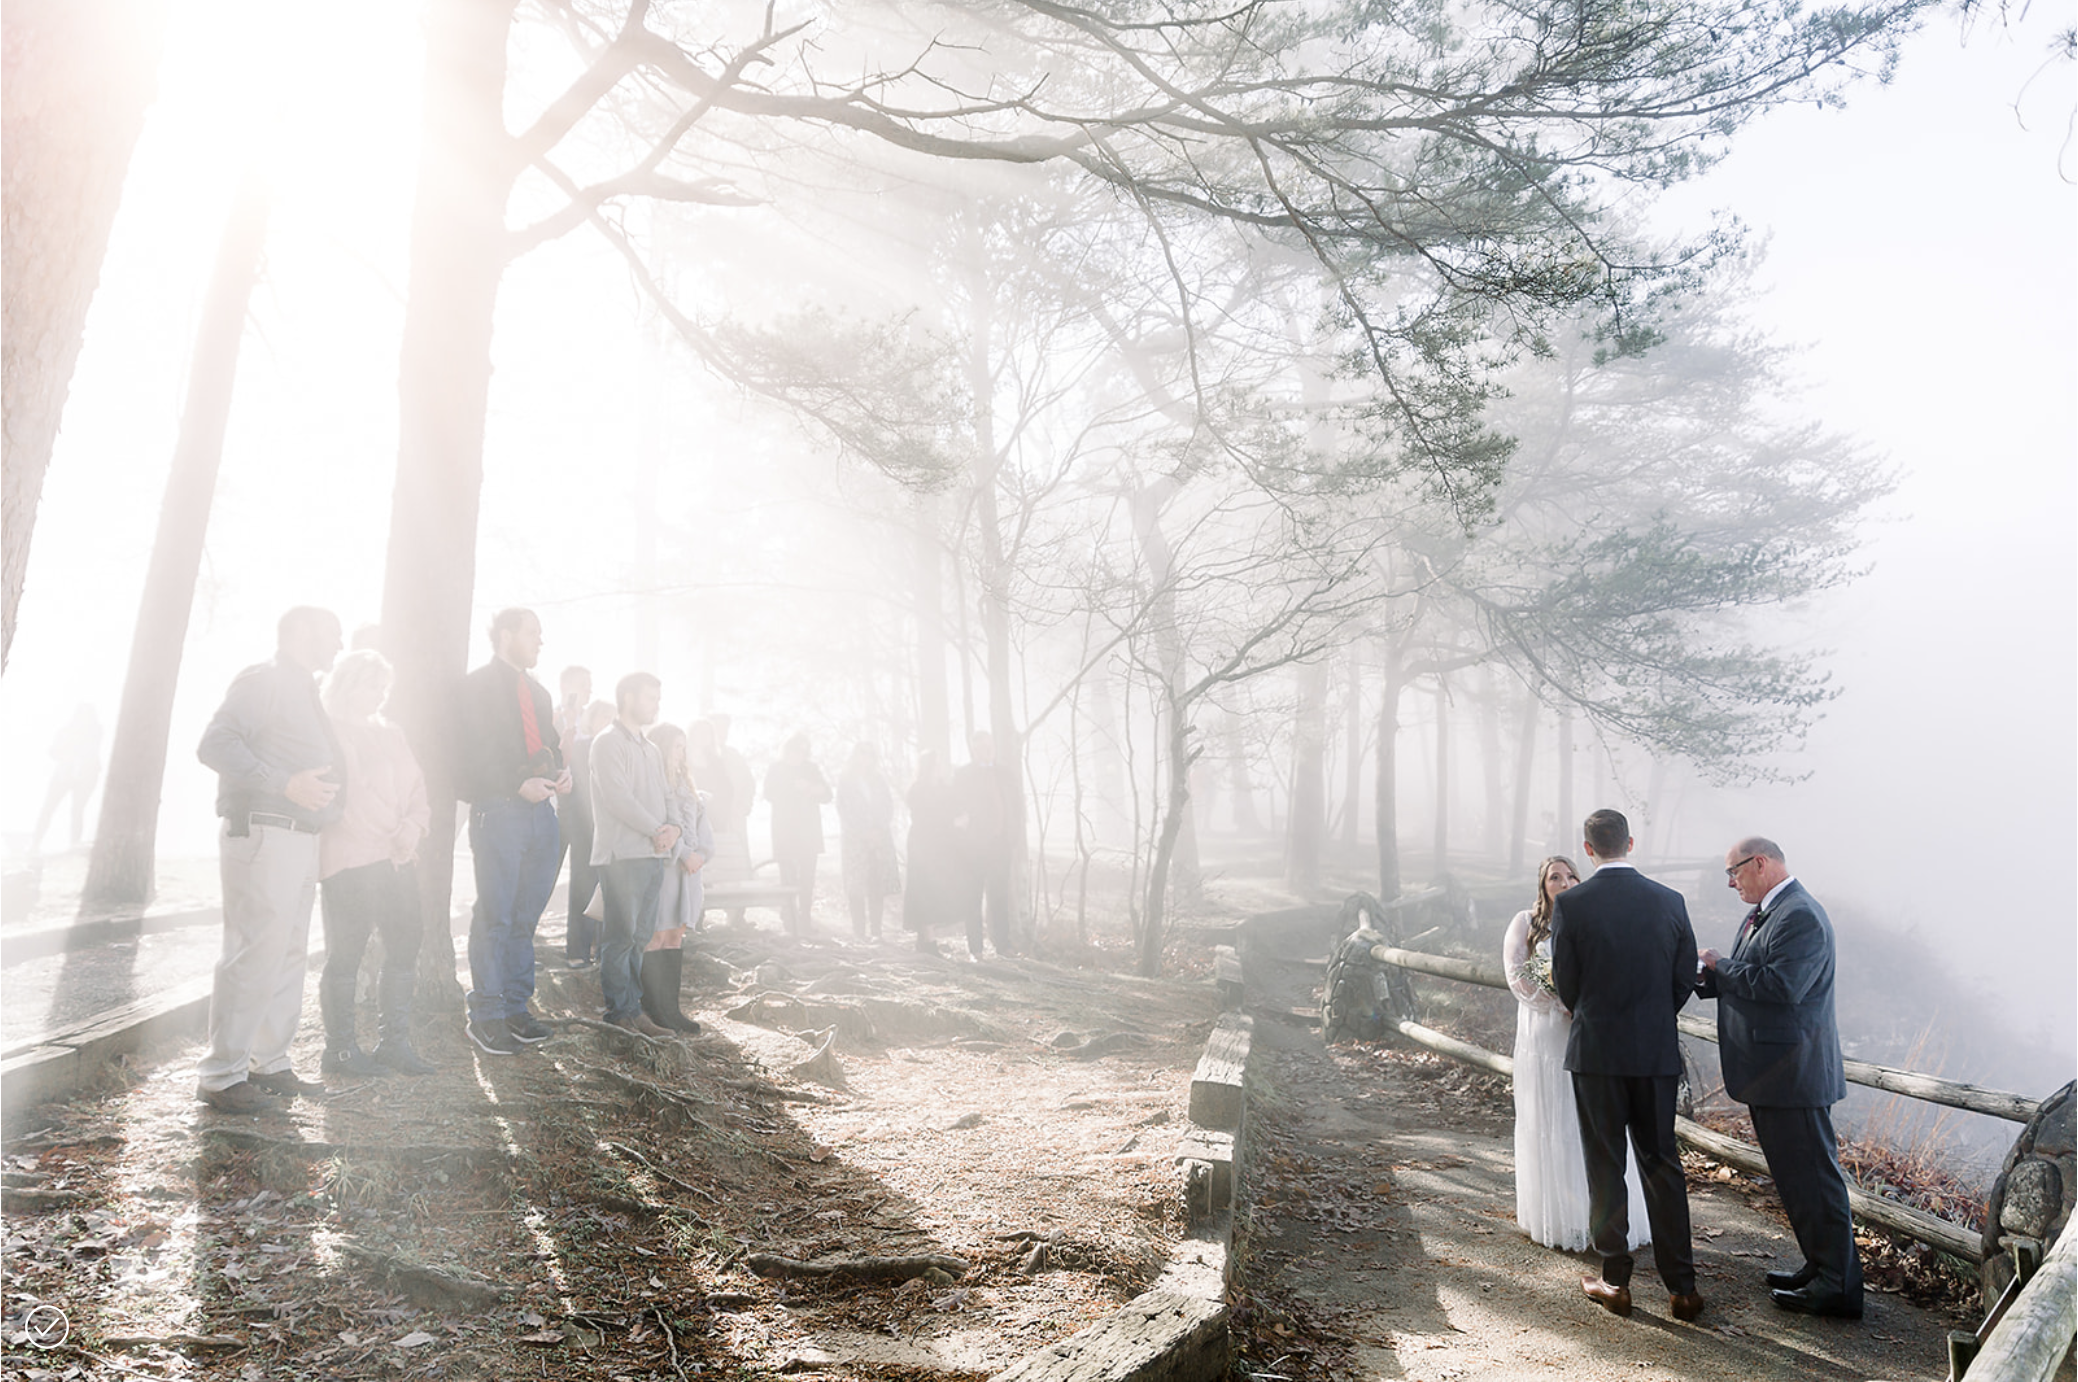 cloudland canyon state park wedding venue feature by chattanooga wedding photographer alyssa rachelle photography